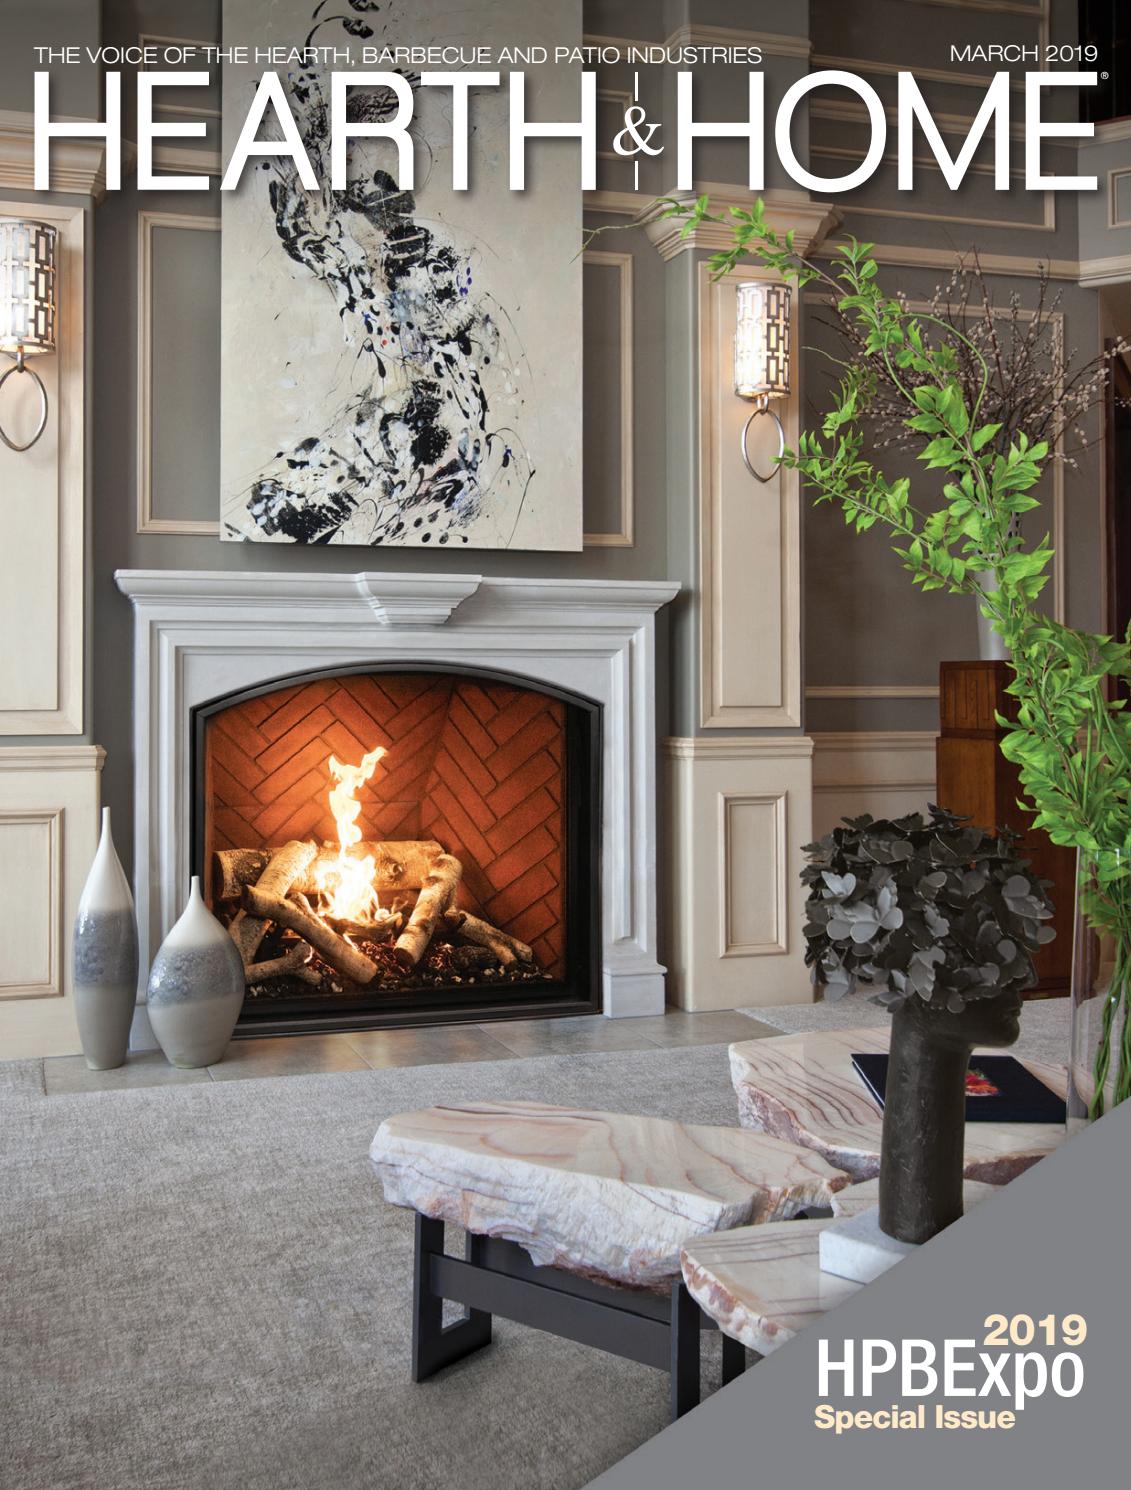 Direct Vent Gas Fireplace Reviews 2017 Awesome Hearth &amp; Home Magazine – 2019 March issue by Hearth &amp; Home